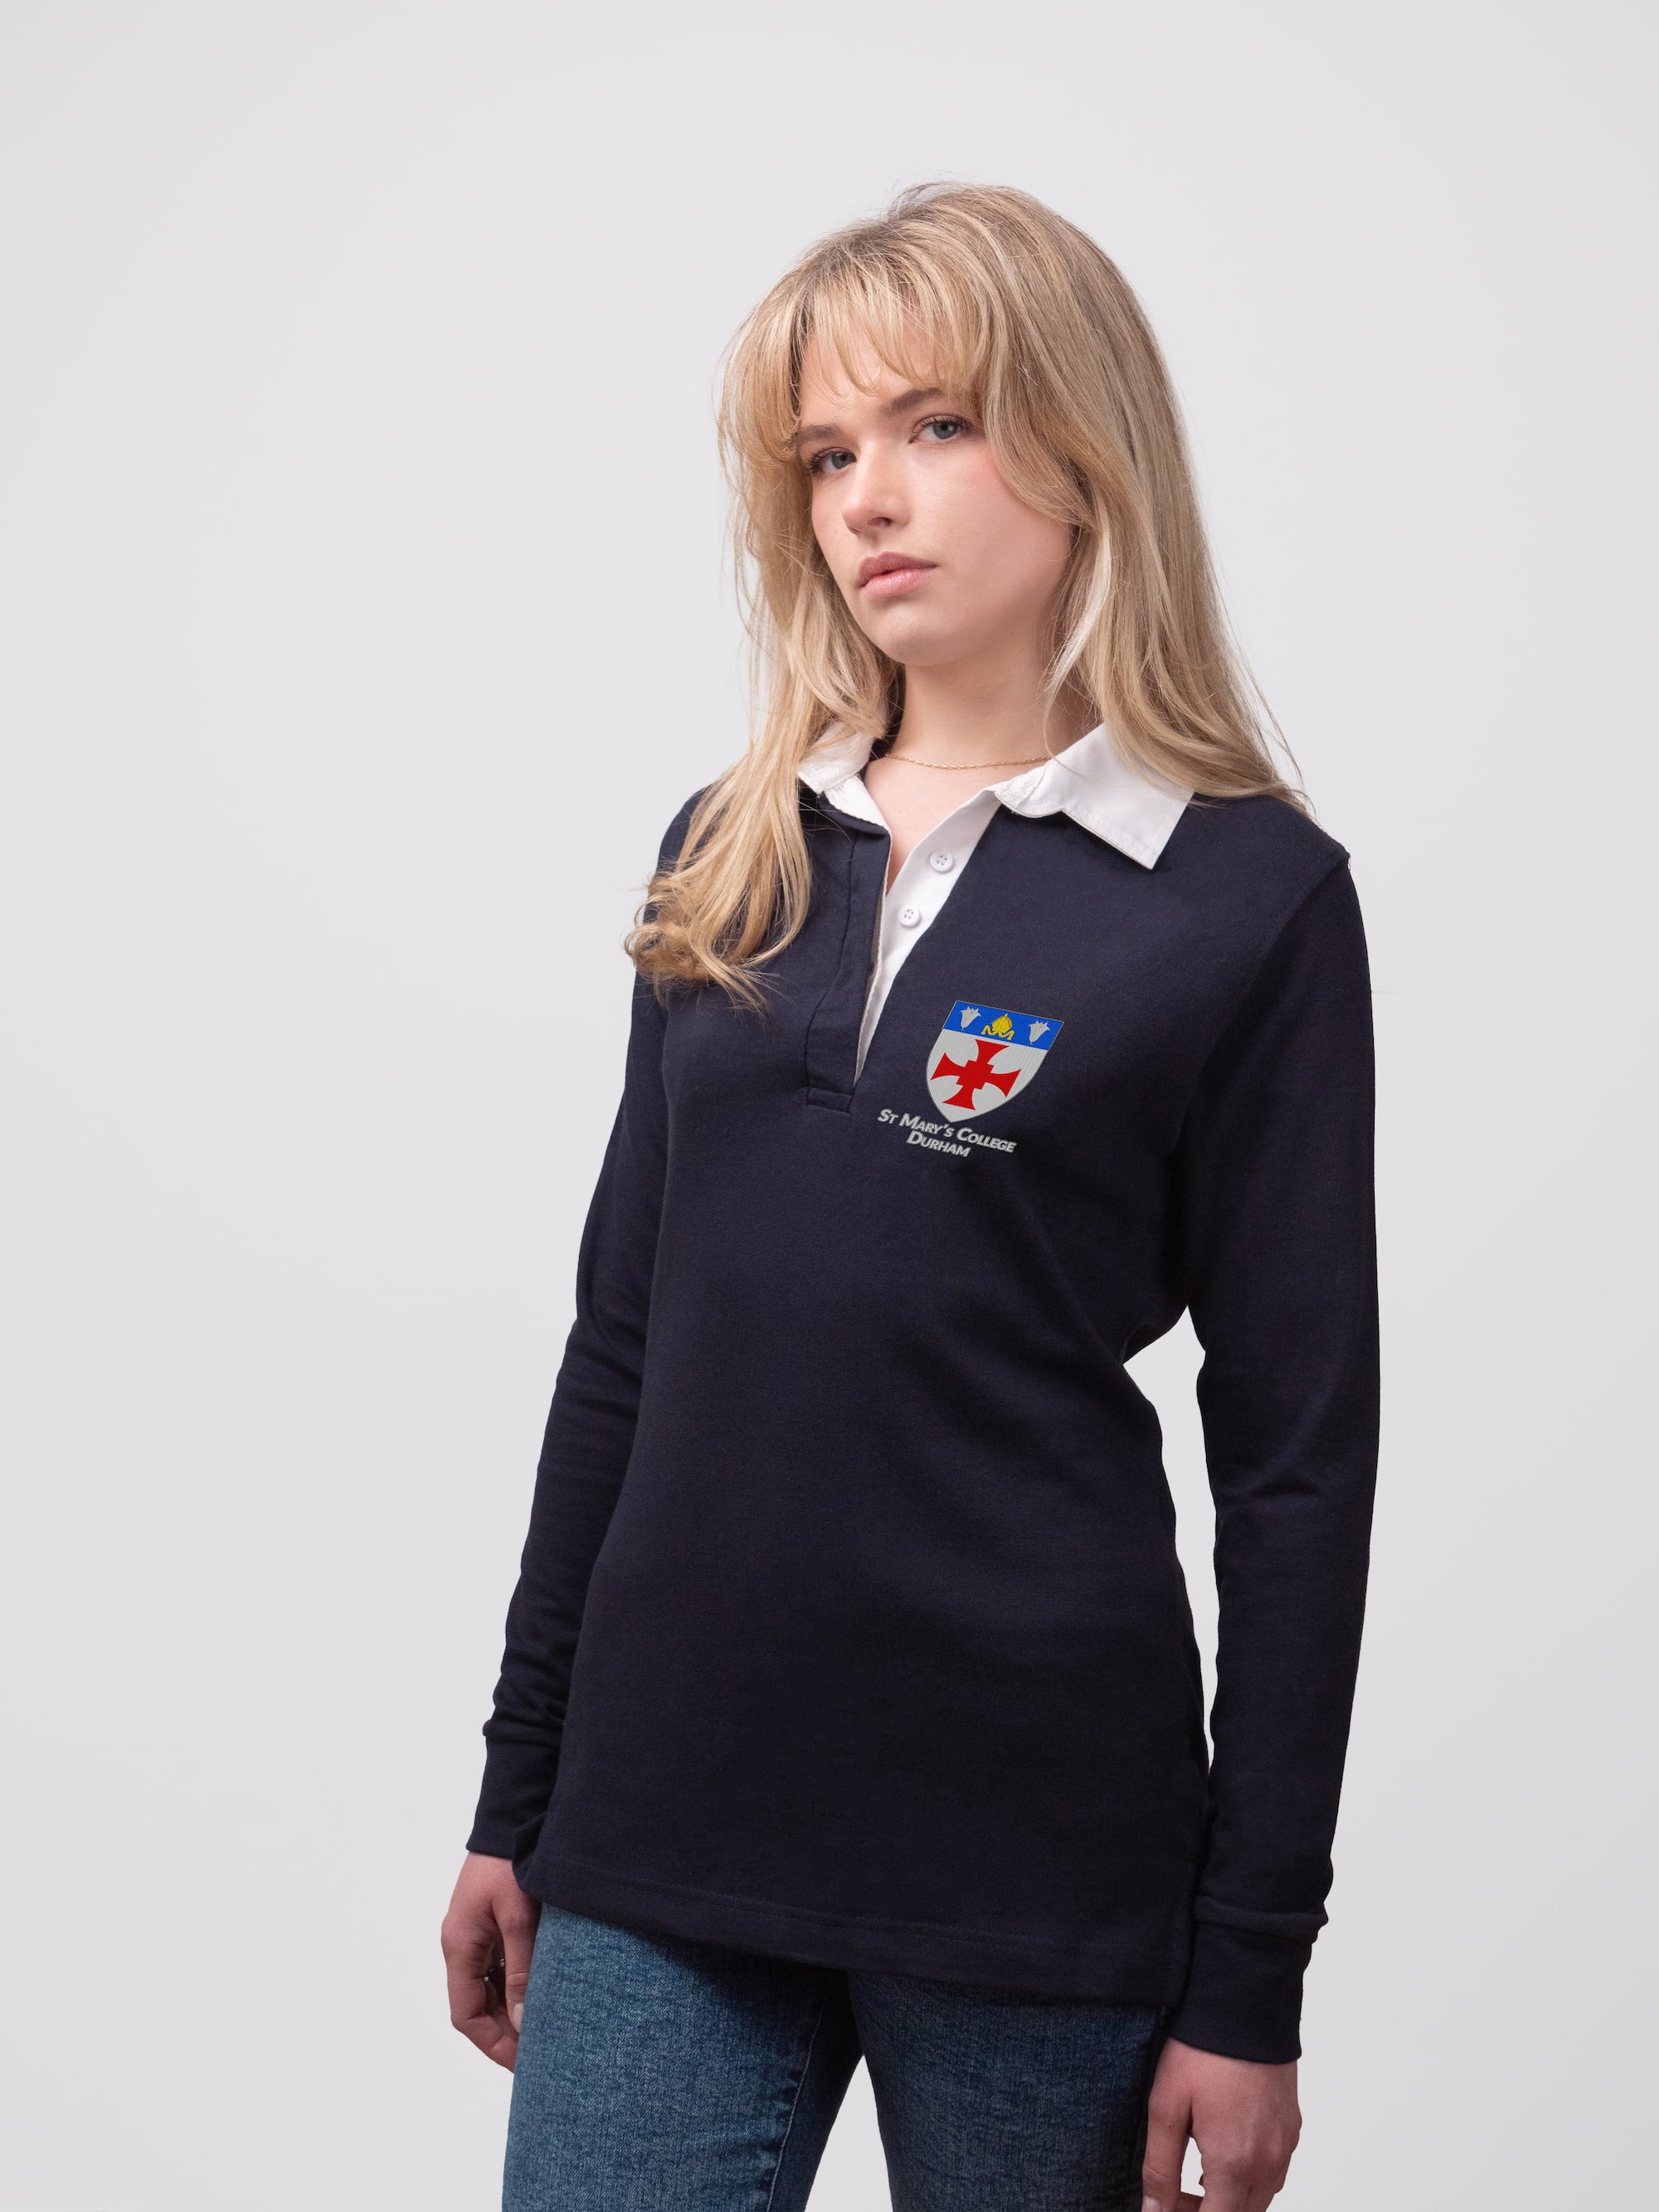 Student wearing a navy St Mary's College rugby shirt with embroidered crest